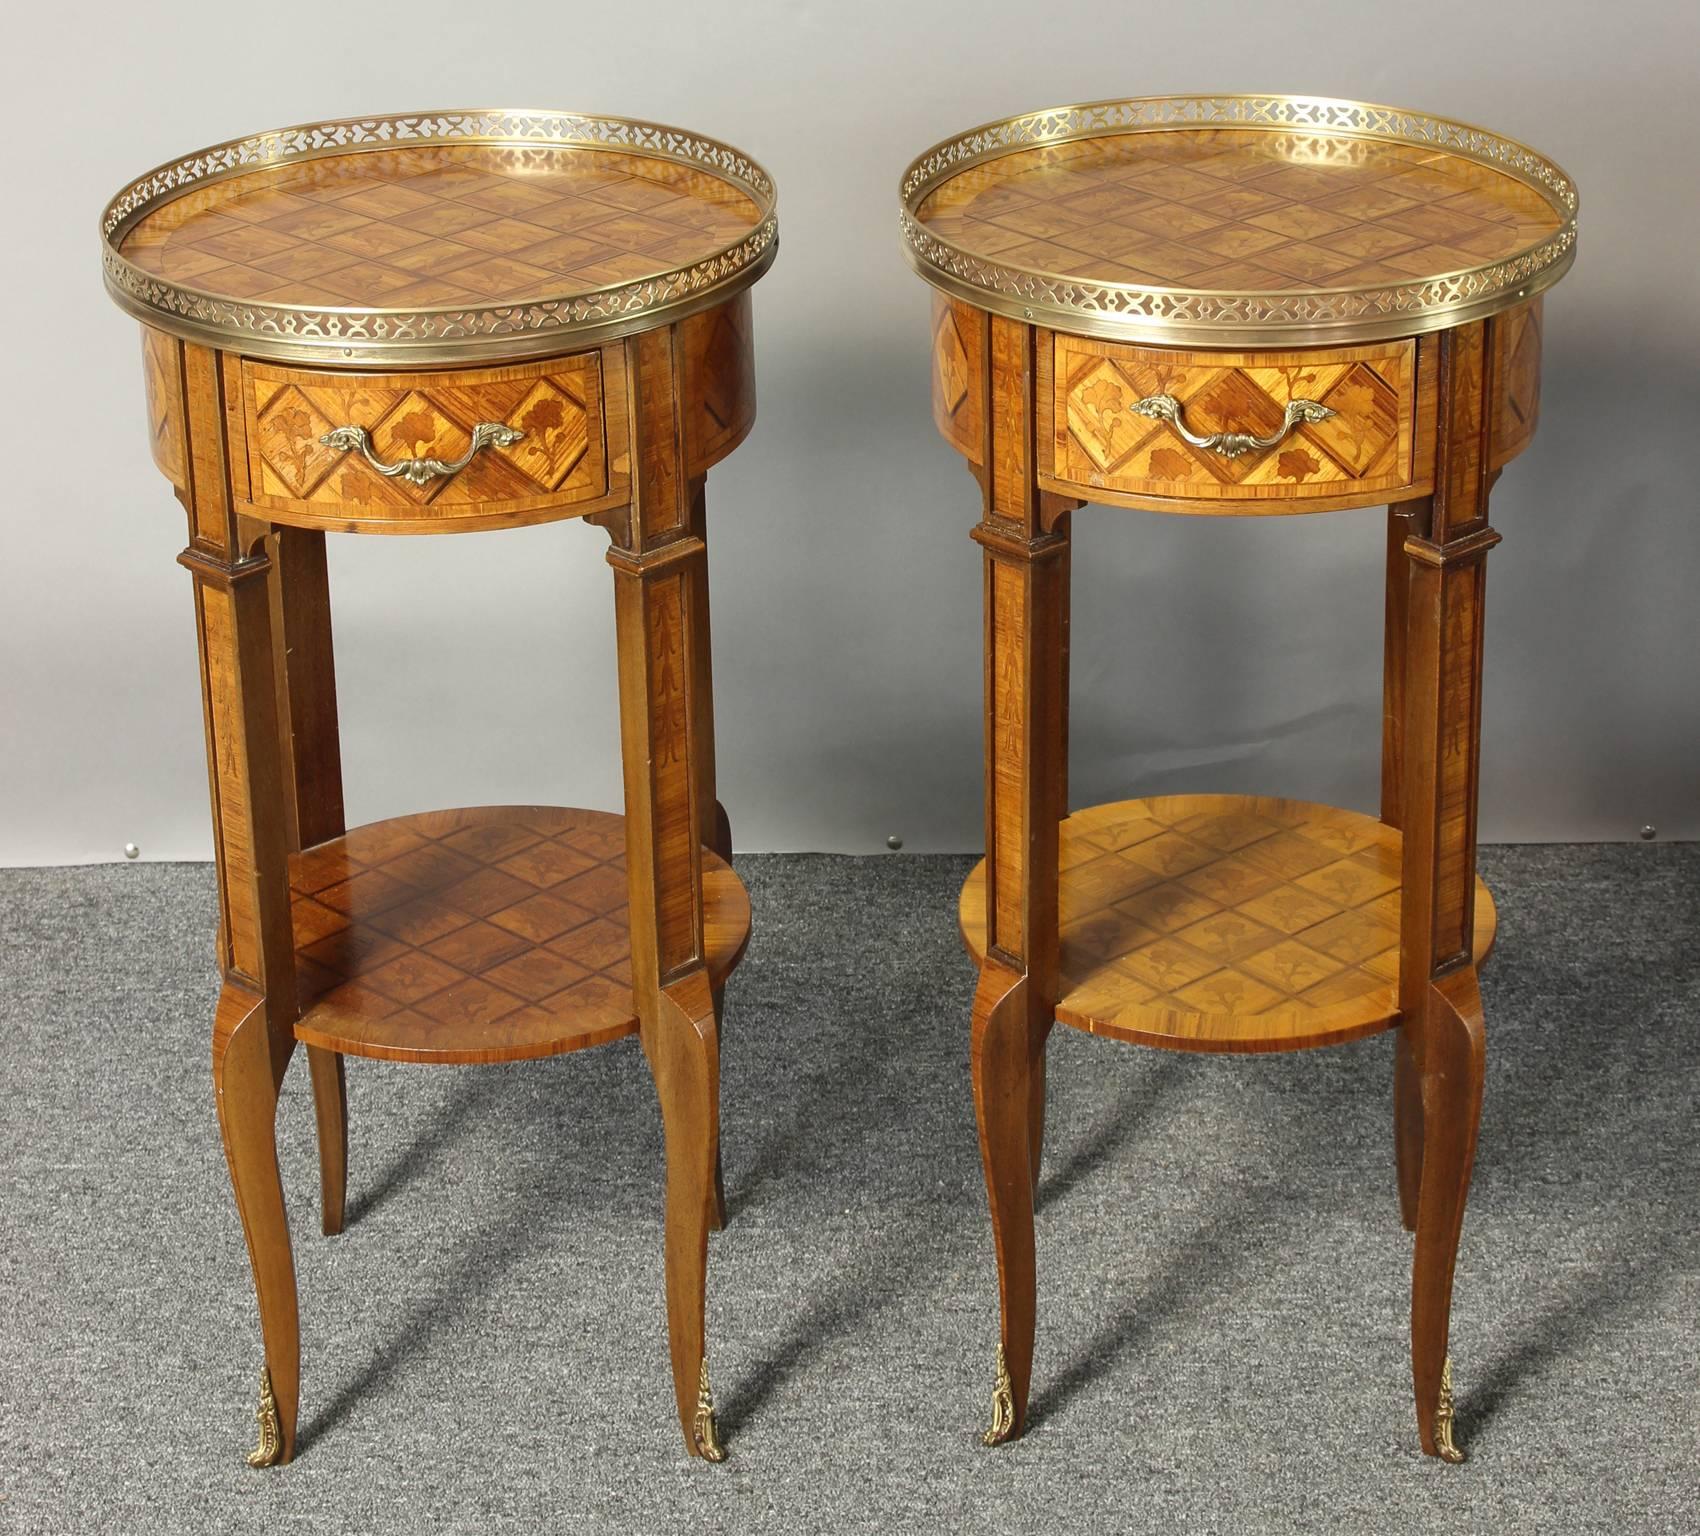 An elegant pair of early 20th century French marquetry side tables in the Louis XV-XVI transition style. The top shelf and round sides have extensive marquetry with a repeating floral design and a pierced brass gallery along the top with two brass